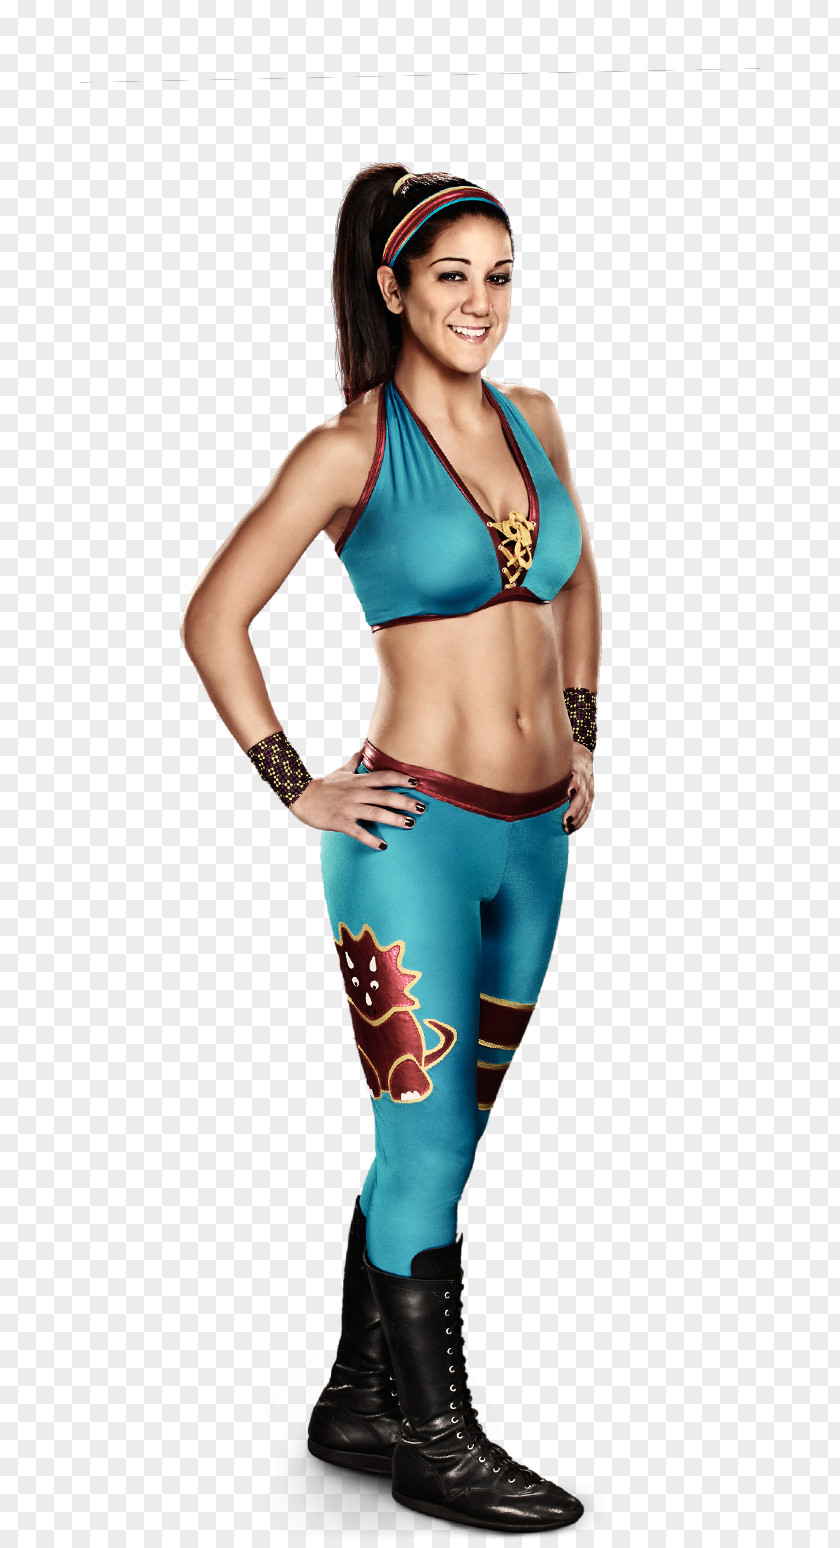 Bayley NXT Women's Championship WWE Mixed Match Challenge Divas Women In PNG in WWE, wrestler clipart PNG